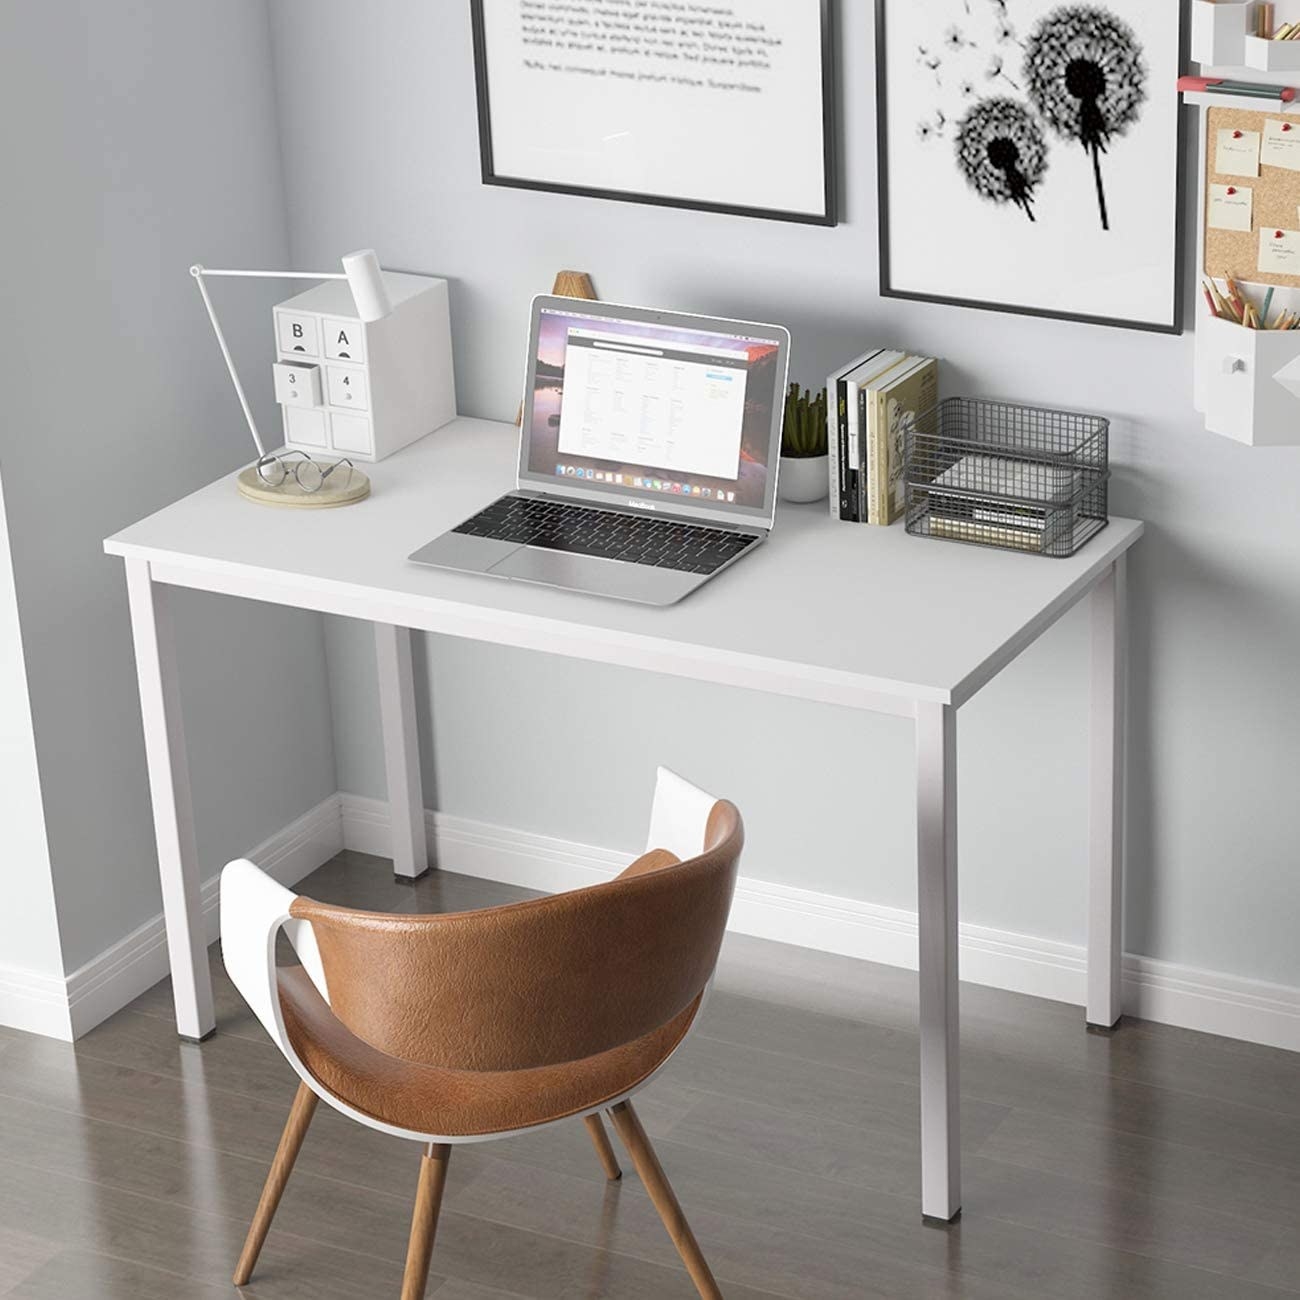 A simple desk with a laptop and organizers on top 